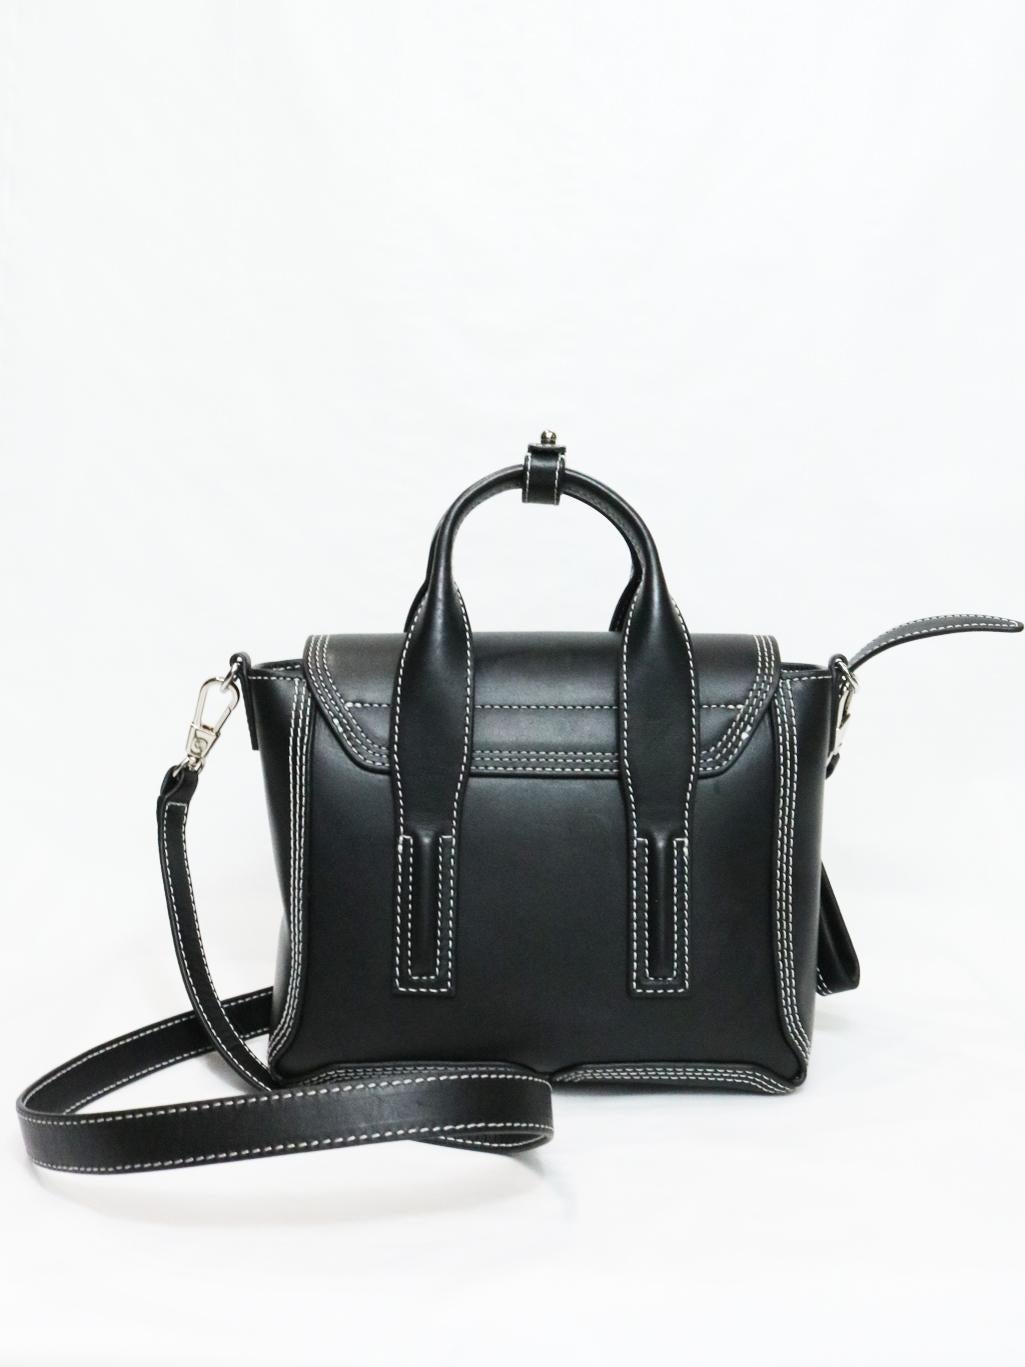 Pashli Mini Satchel black leather, is a small but powerful iconic Philip Lim bag sure to become a staple in your bag rotation. Featuring detachable shoulder strap, double top rolled handles, flap top with push lock closure, exterior zipper gussets